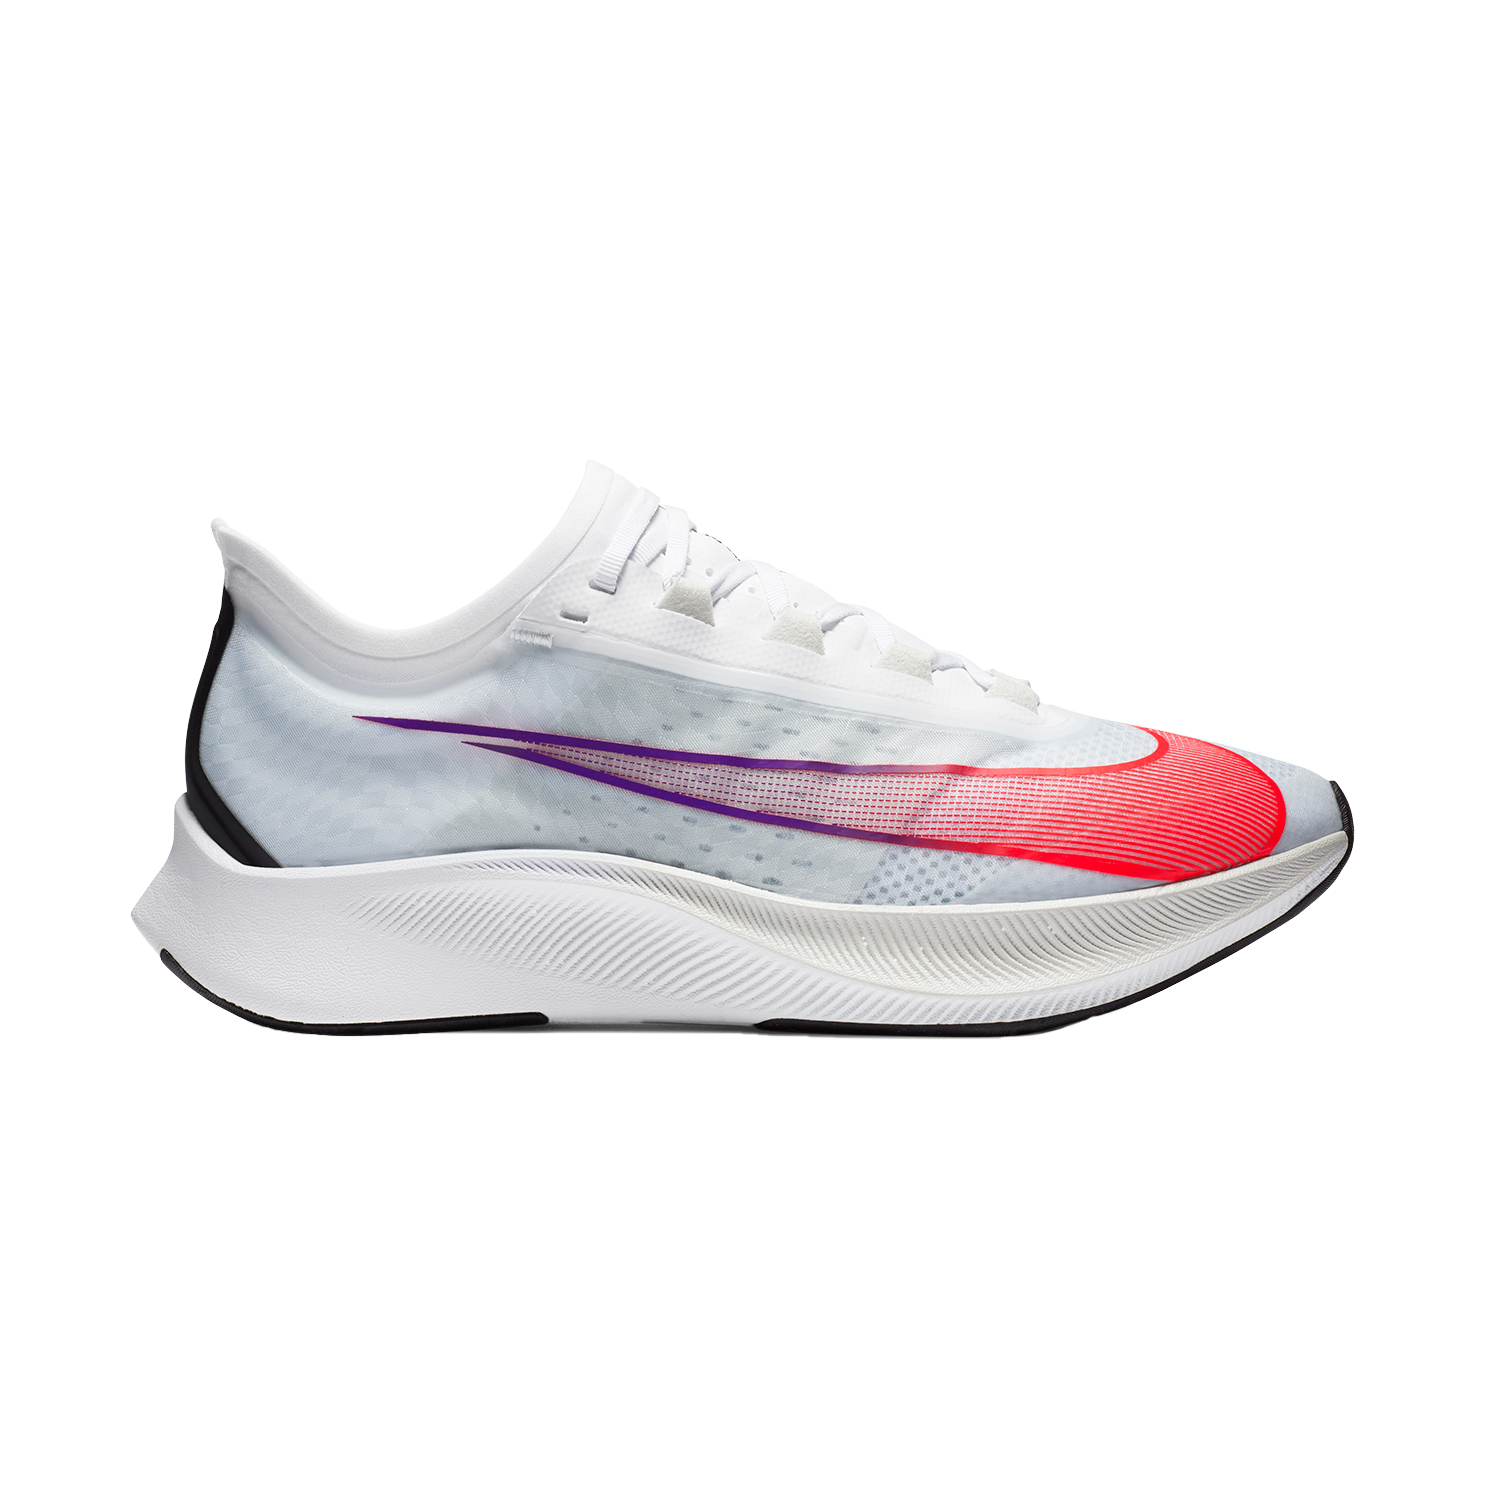 Nike Zoom Fly 3 Men's Running Shoes 